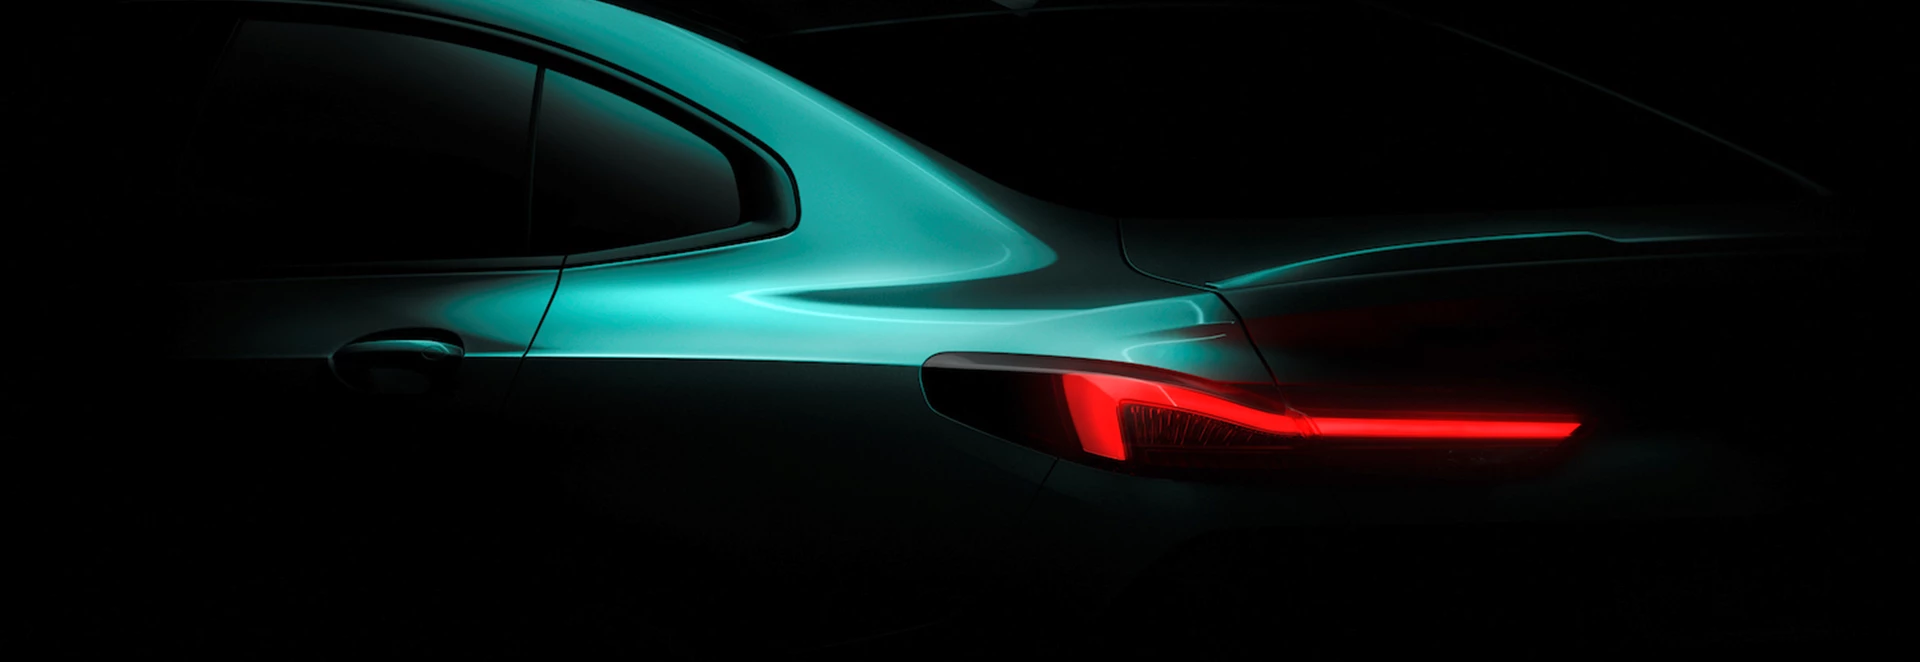 New BMW 2 Series Gran Coupe teased